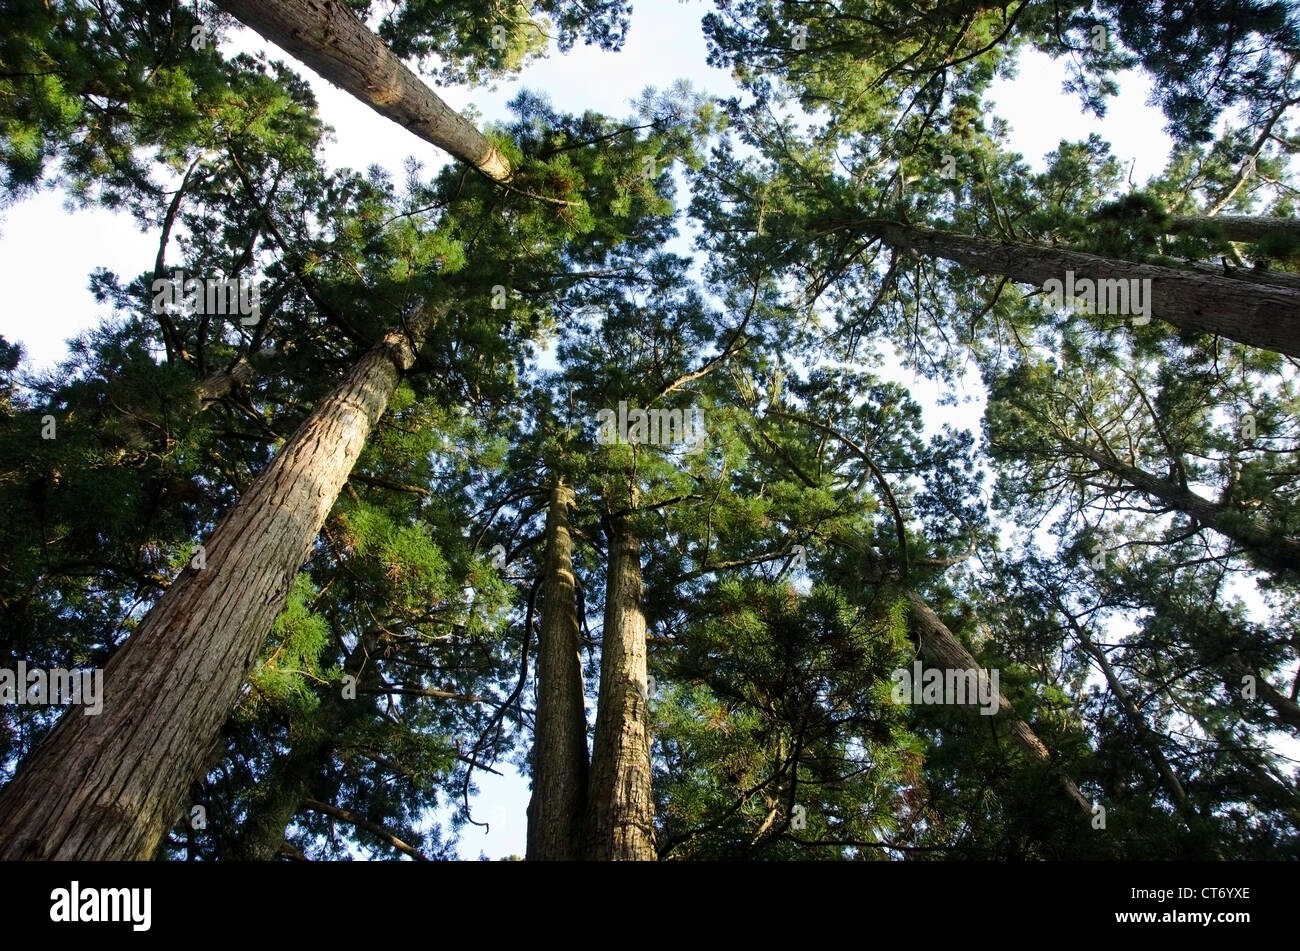 Tall Straight Pine Trees And Green Grass In The Nordic Woods Stock Photo,  Picture and Royalty Free Image. Image 57840407.